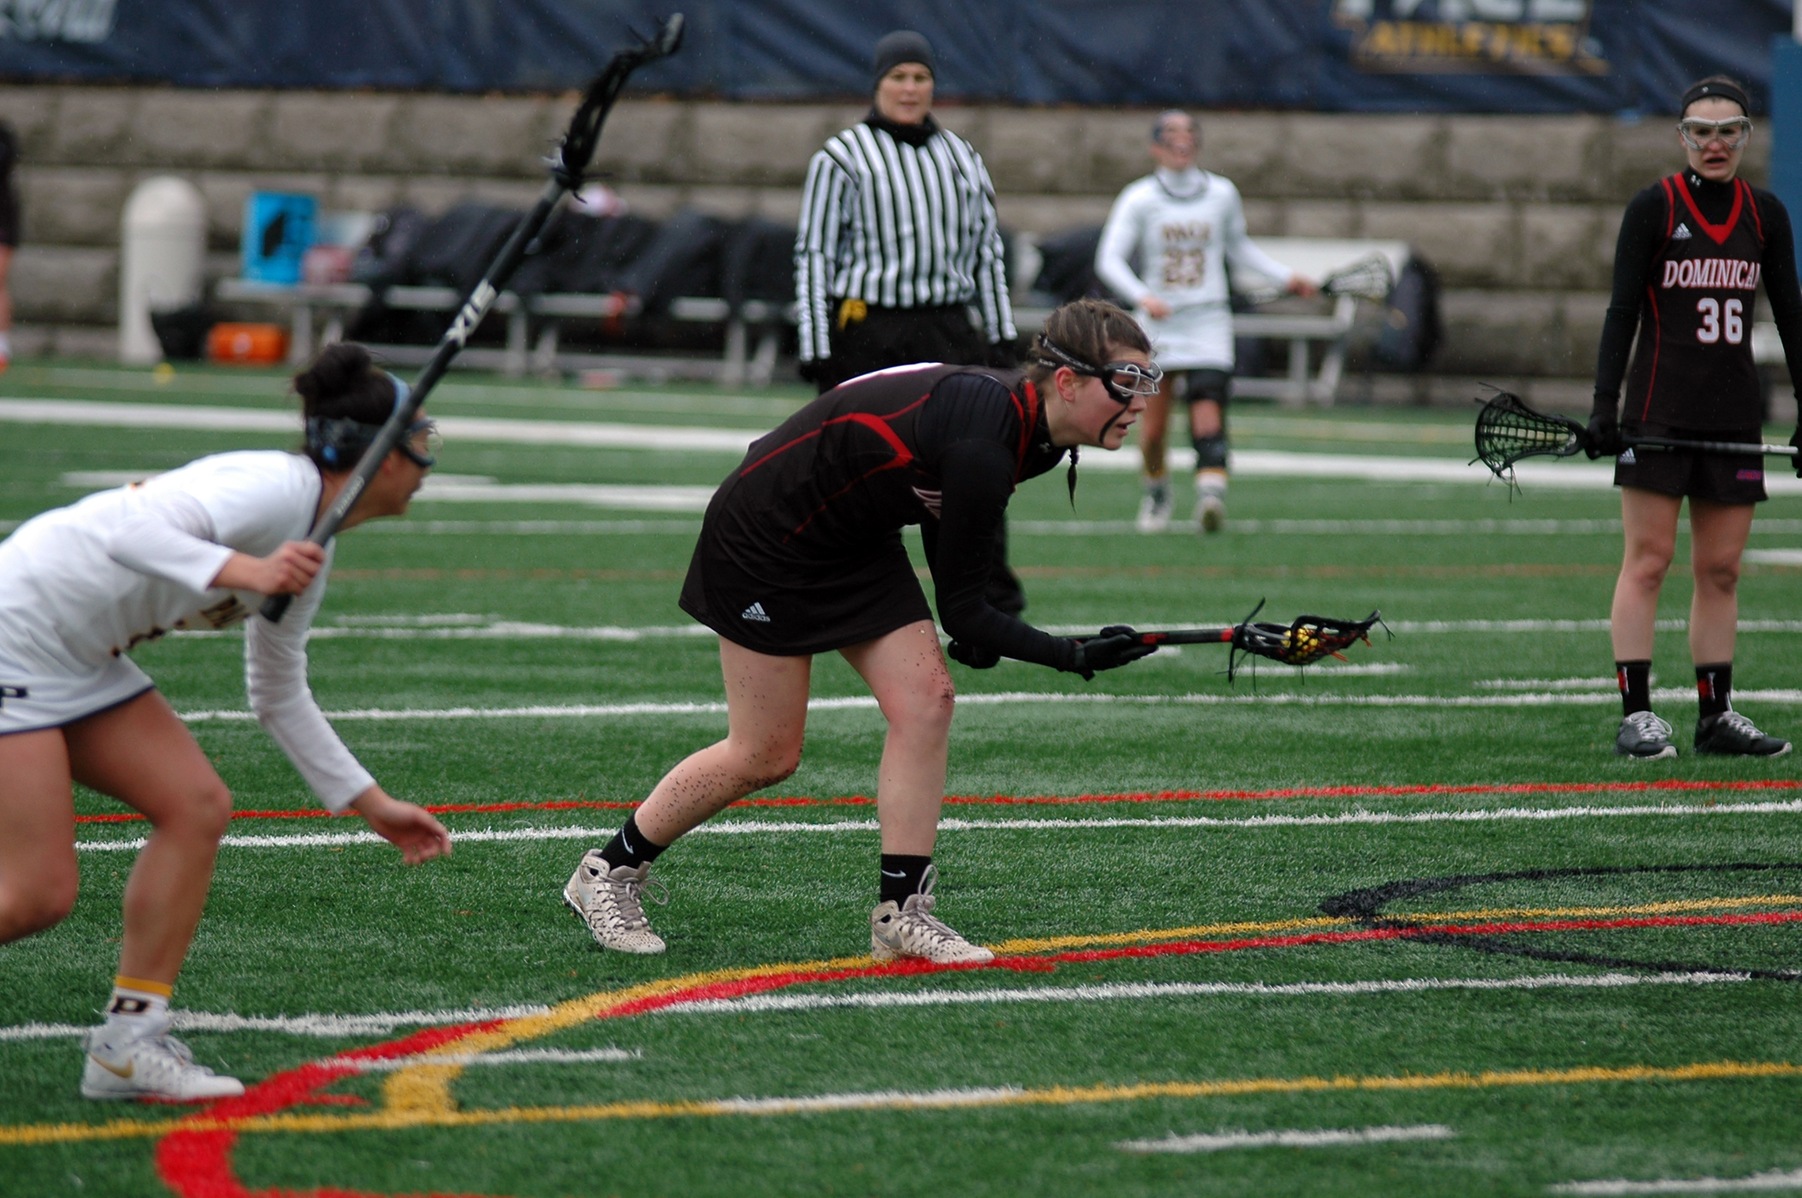 The women's lacrosse team improved to 2-1 in CACC play with a win over Holy Family University.